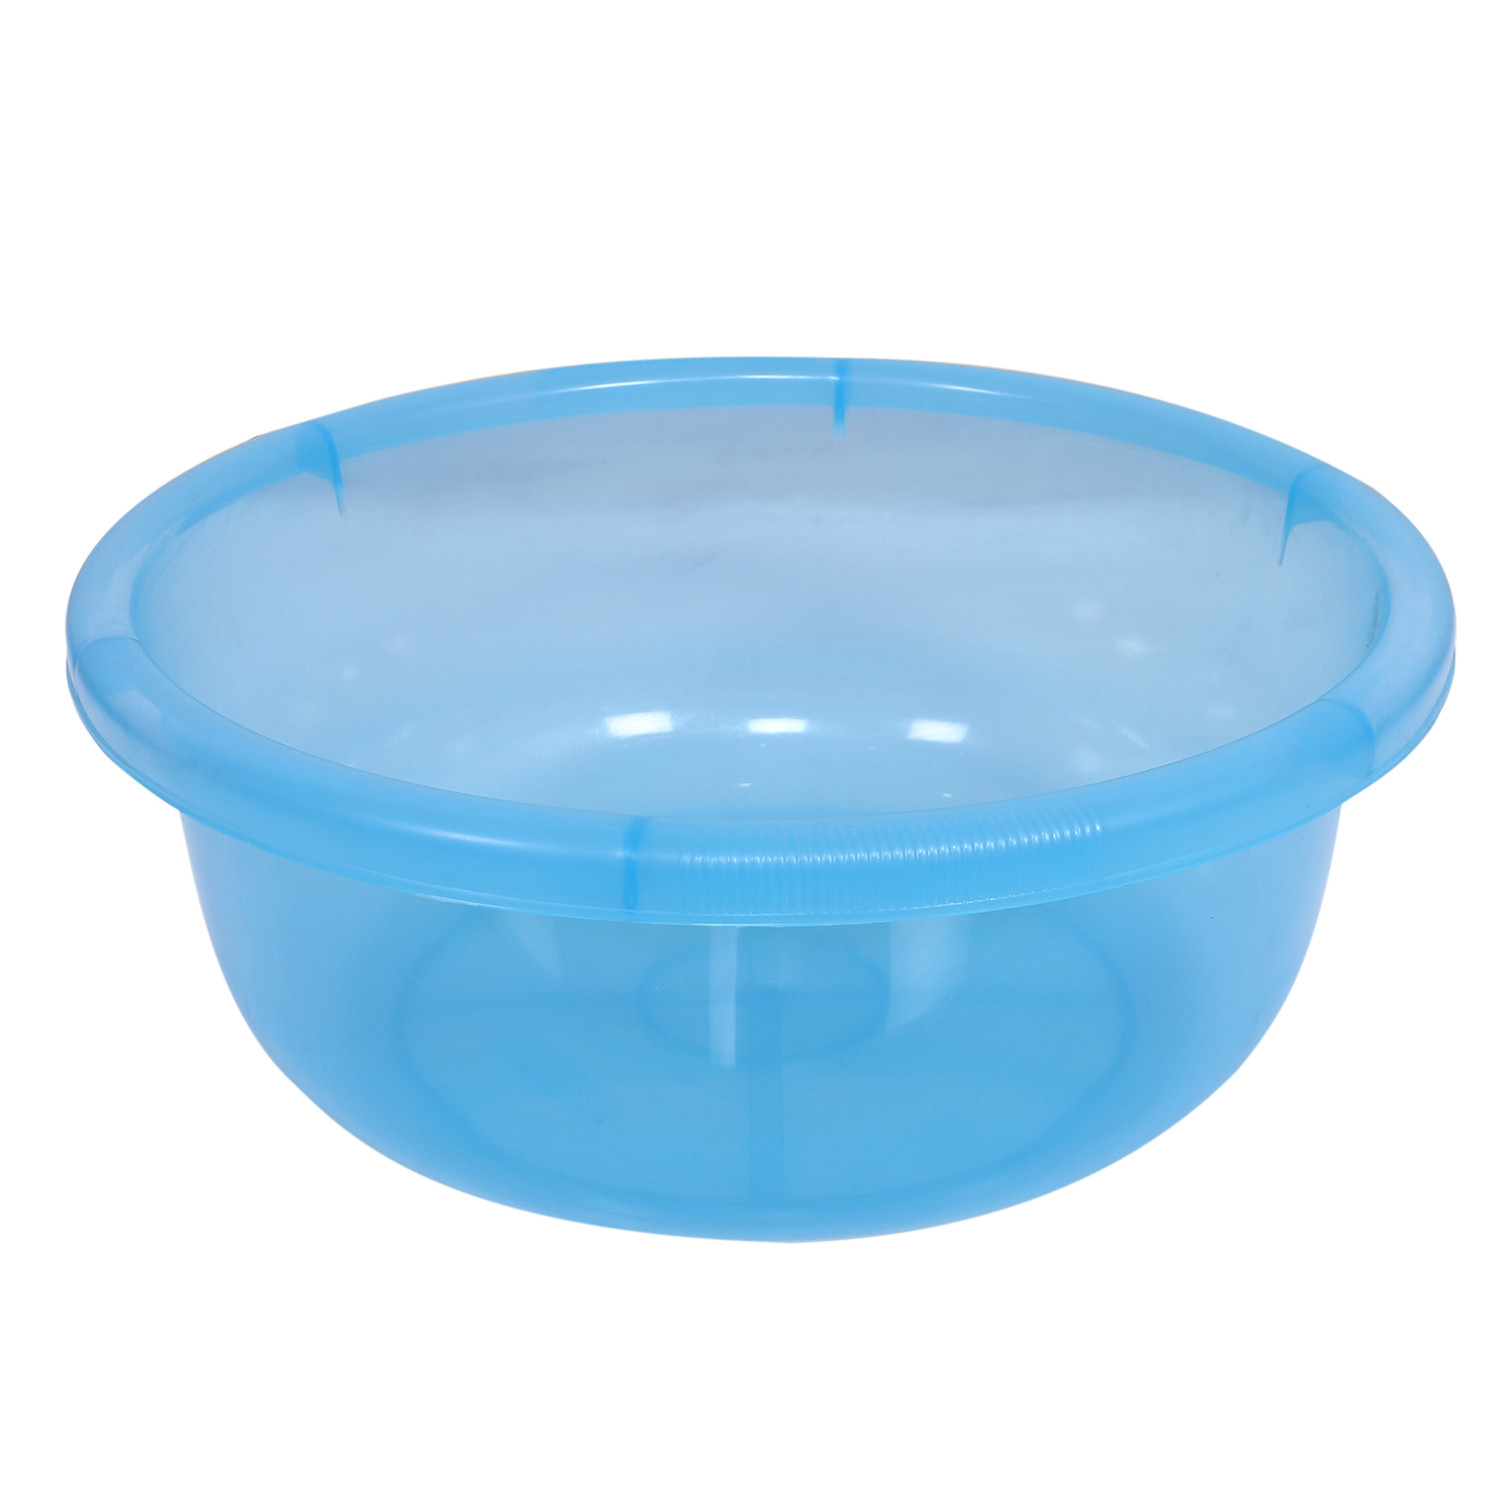 Kuber Industries Durable Deep Bath Tub|Versatile Short Livestock Feeding Pan|Unbreakable Plastic Utility Gaint Basin for Baby Bathing,Washing Clothes,26 Litre,Pack of 2 (Sky Blue & Pink)